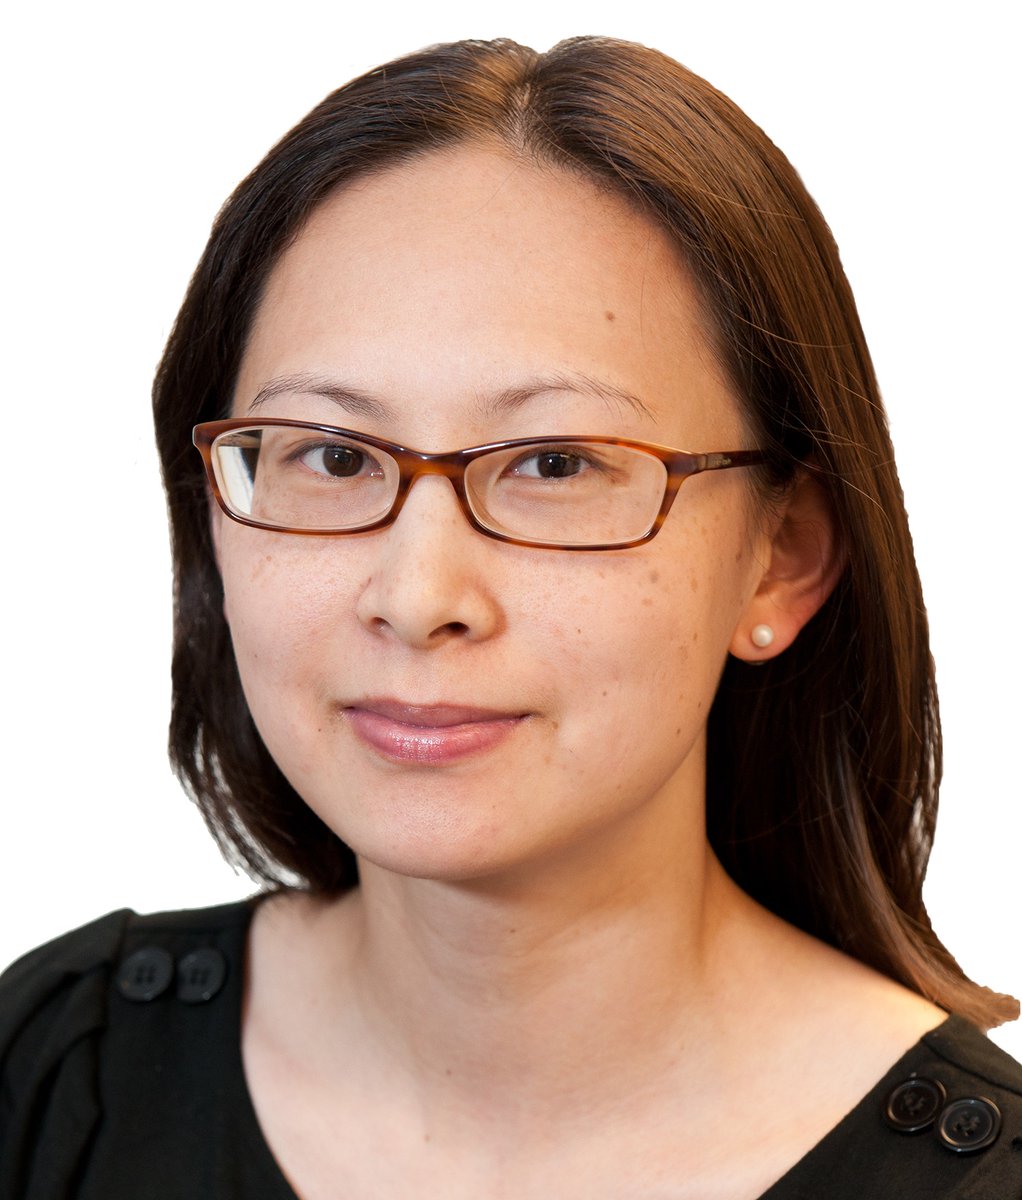 Congratulations to Alice Cheong on her FY24 promotion to Assistant Professor of Medicine! #Promotion #NMHospMed